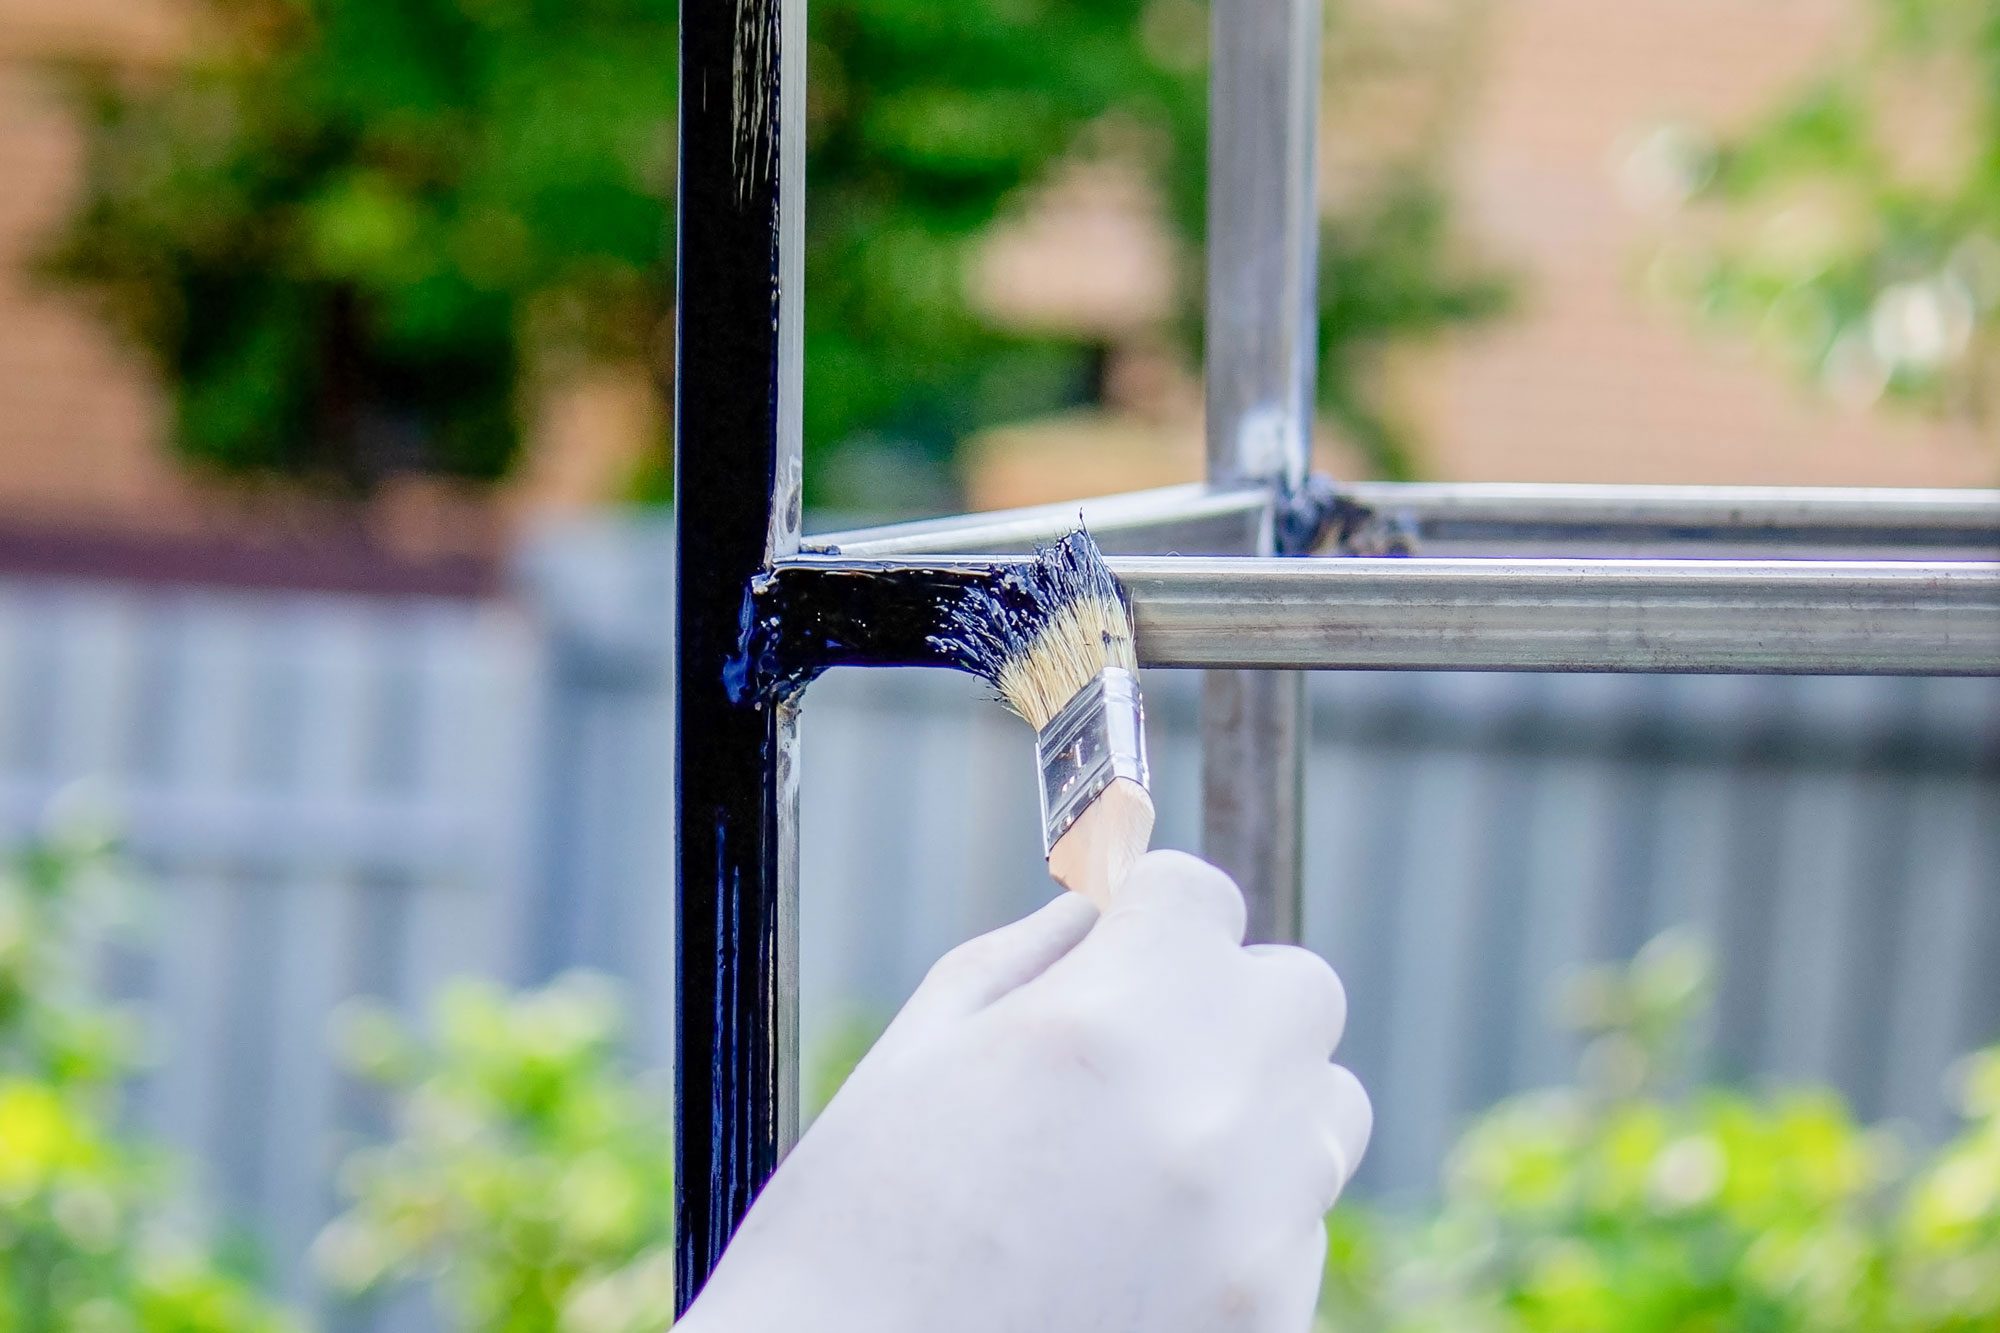 What Is The Best Paint For Metal Surfaces Outdoor & Indoor?